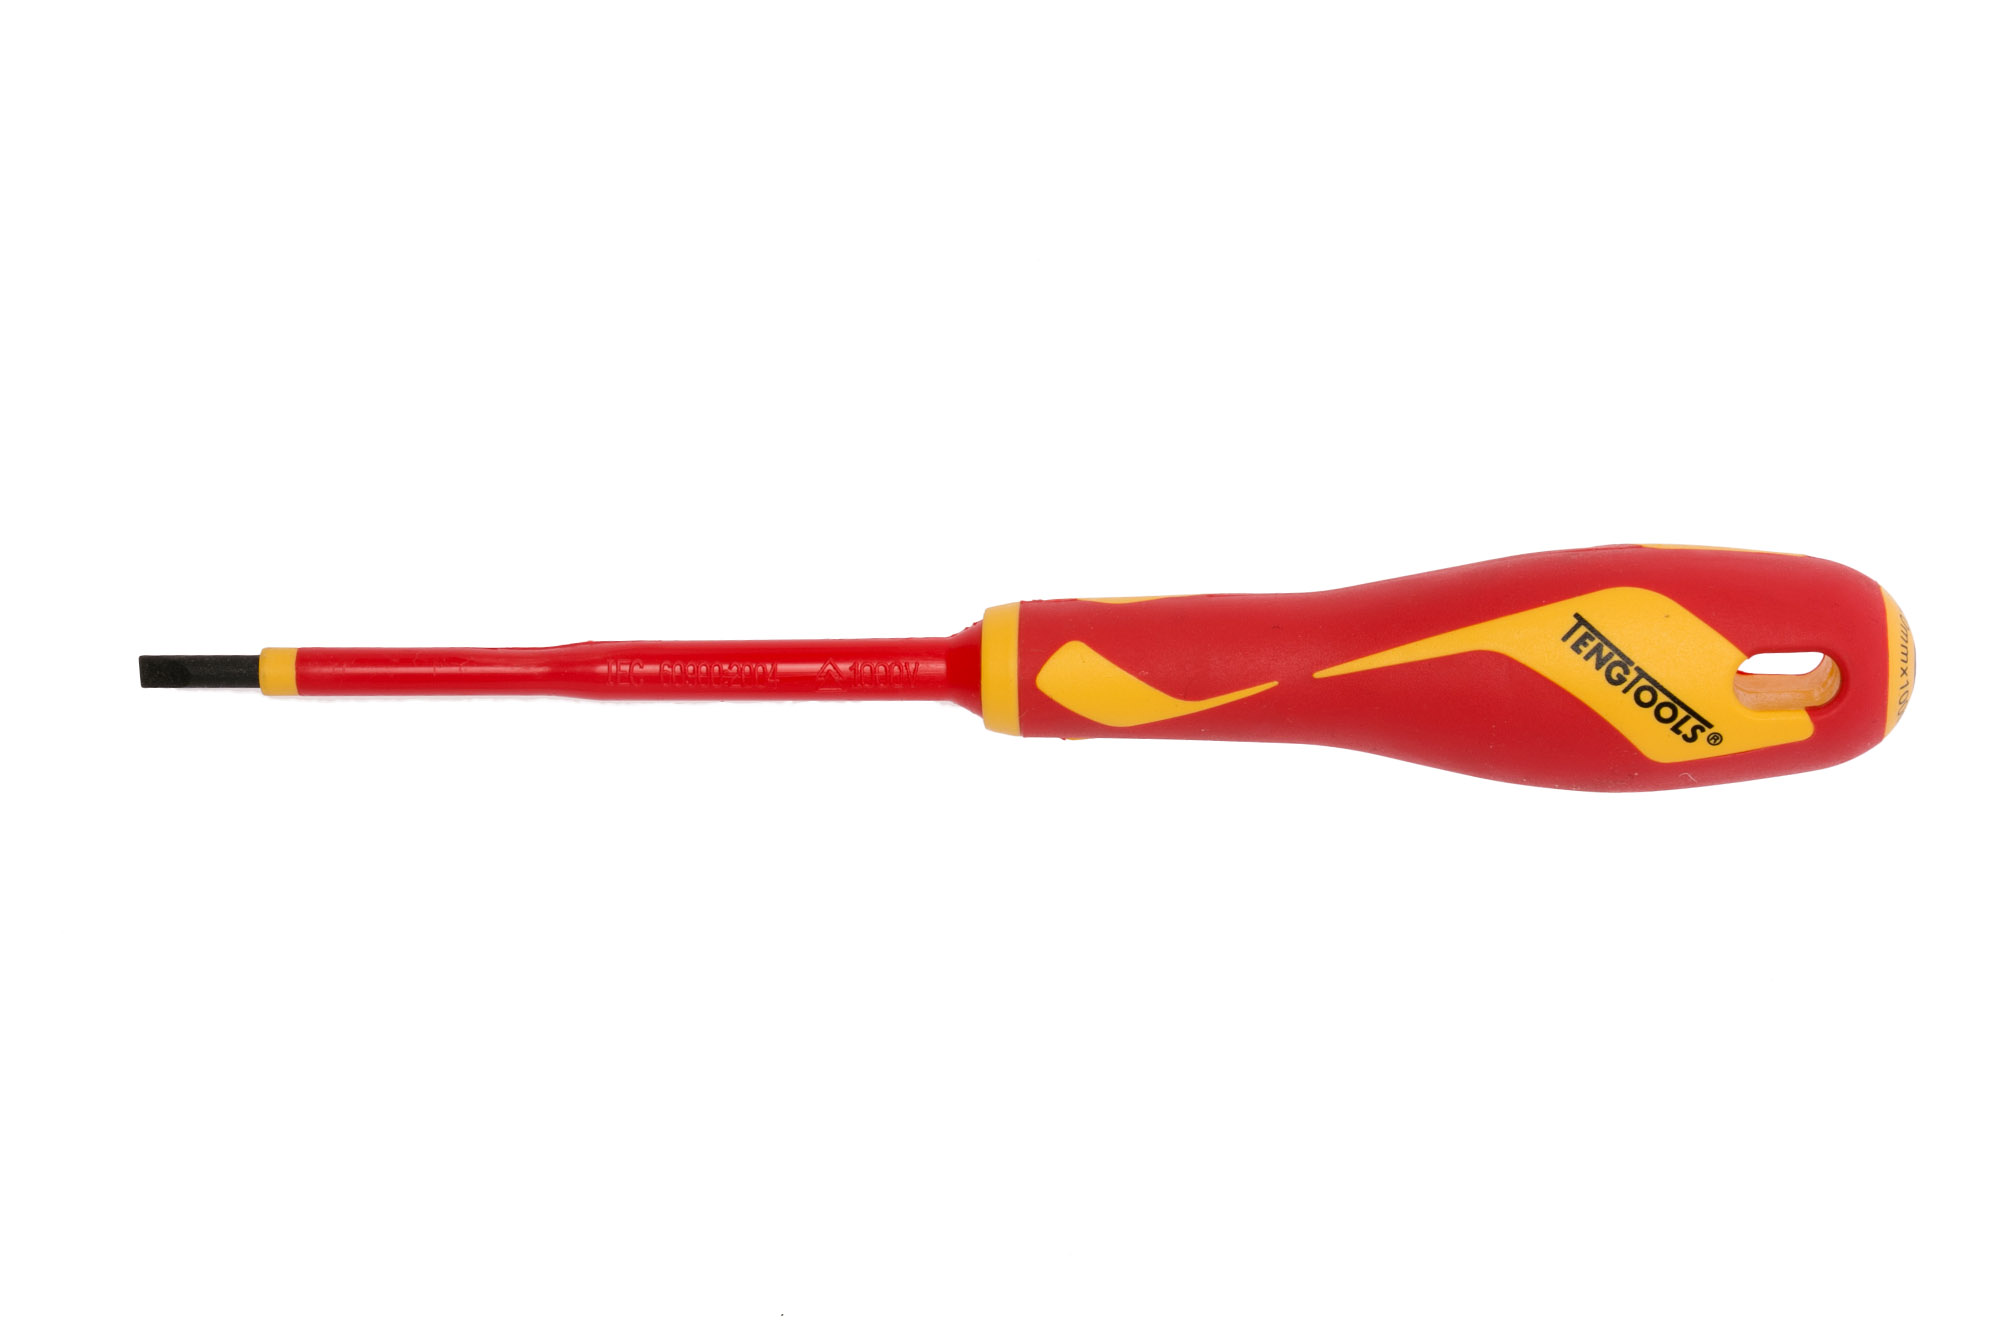 Teng Tools 4mm 1000 Volt Flat Type Slotted Head Insulated Screwdriver - MDV824N